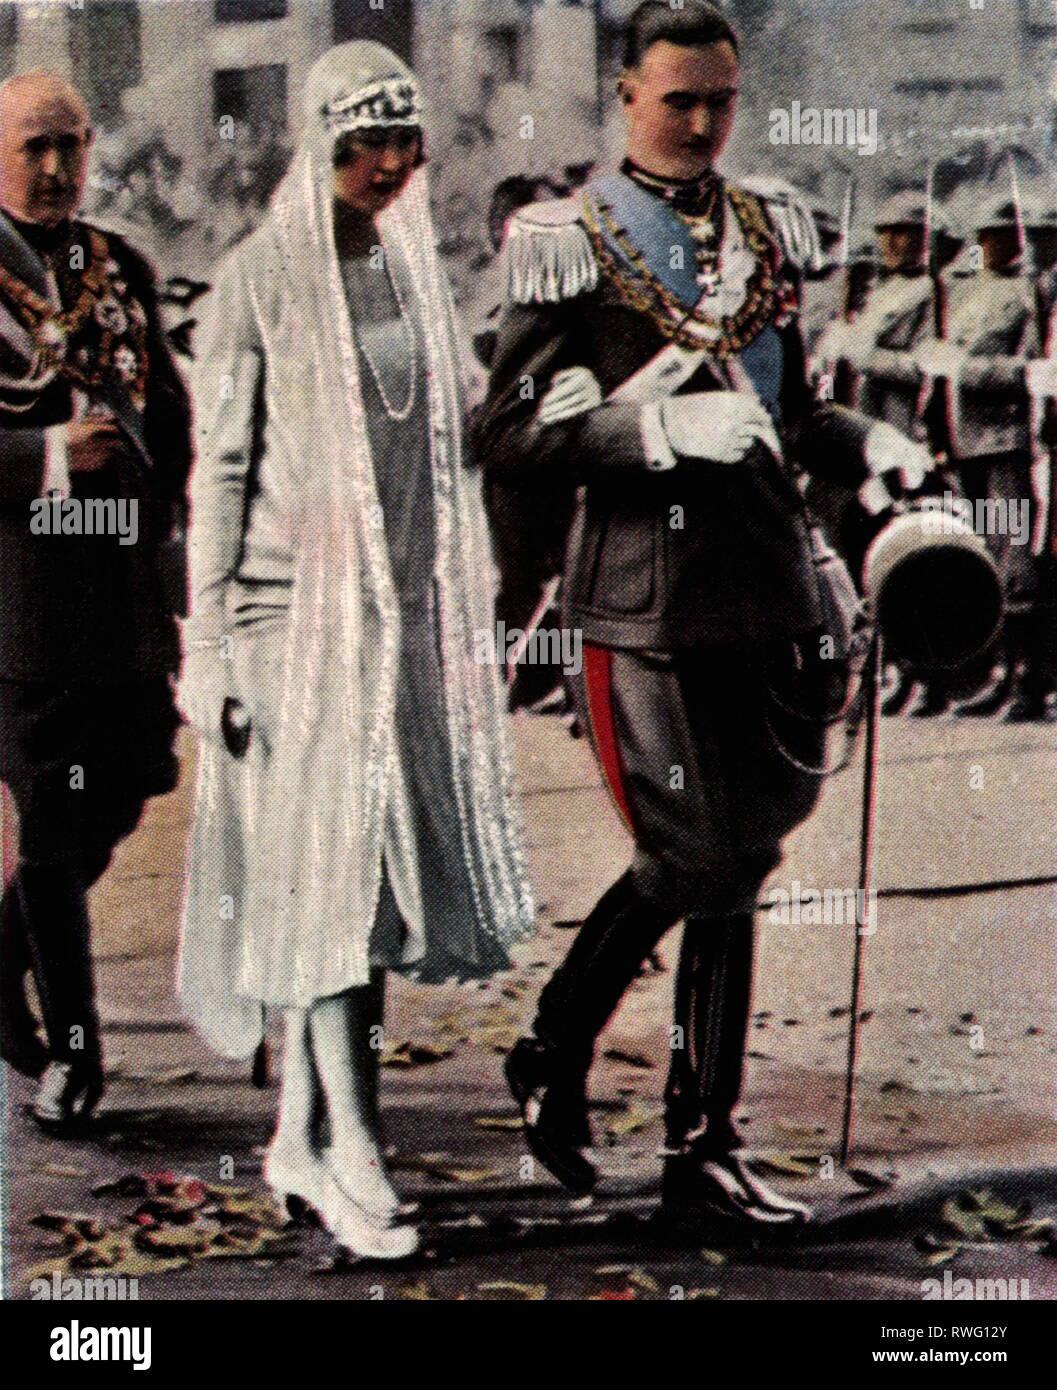 Humbert II, 15.9.1904 - 18.3.1983, King of Italy 9.5.1946 - 13.6.1946, full length, marriage with Marie José of Belgium, Rome, 8.1.1930, coloured photograph, cigarette card, series 'Die Nachkriegszeit', 1935, Additional-Rights-Clearance-Info-Not-Available Stock Photo